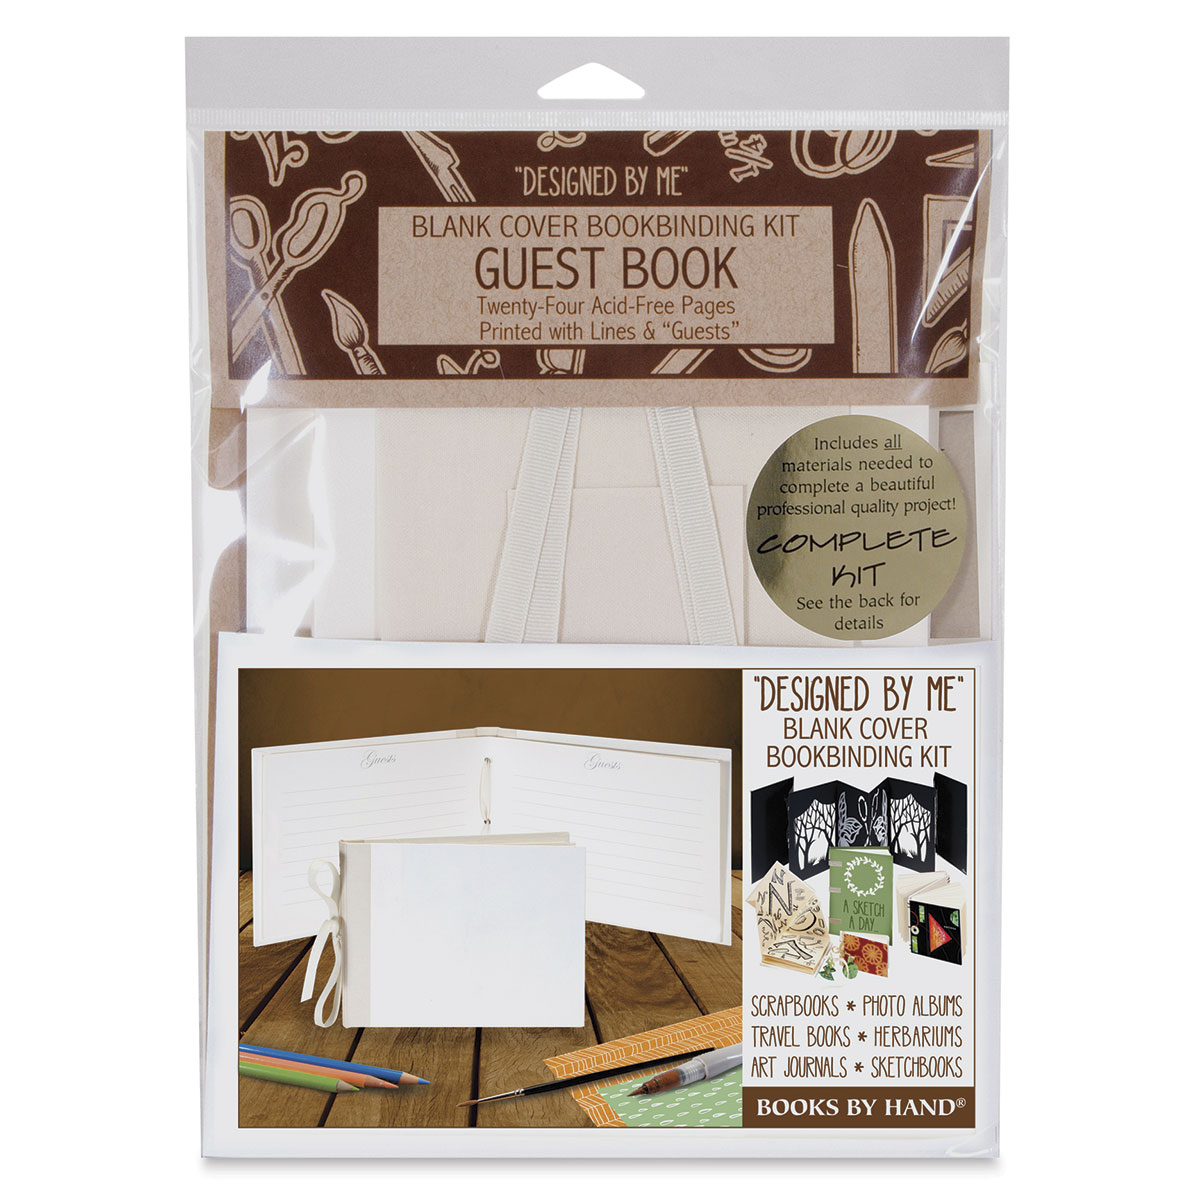 Books by Hand Designed by Me Blank Cover Bookbinding Kit Guest Book, Ivory 7x10.5